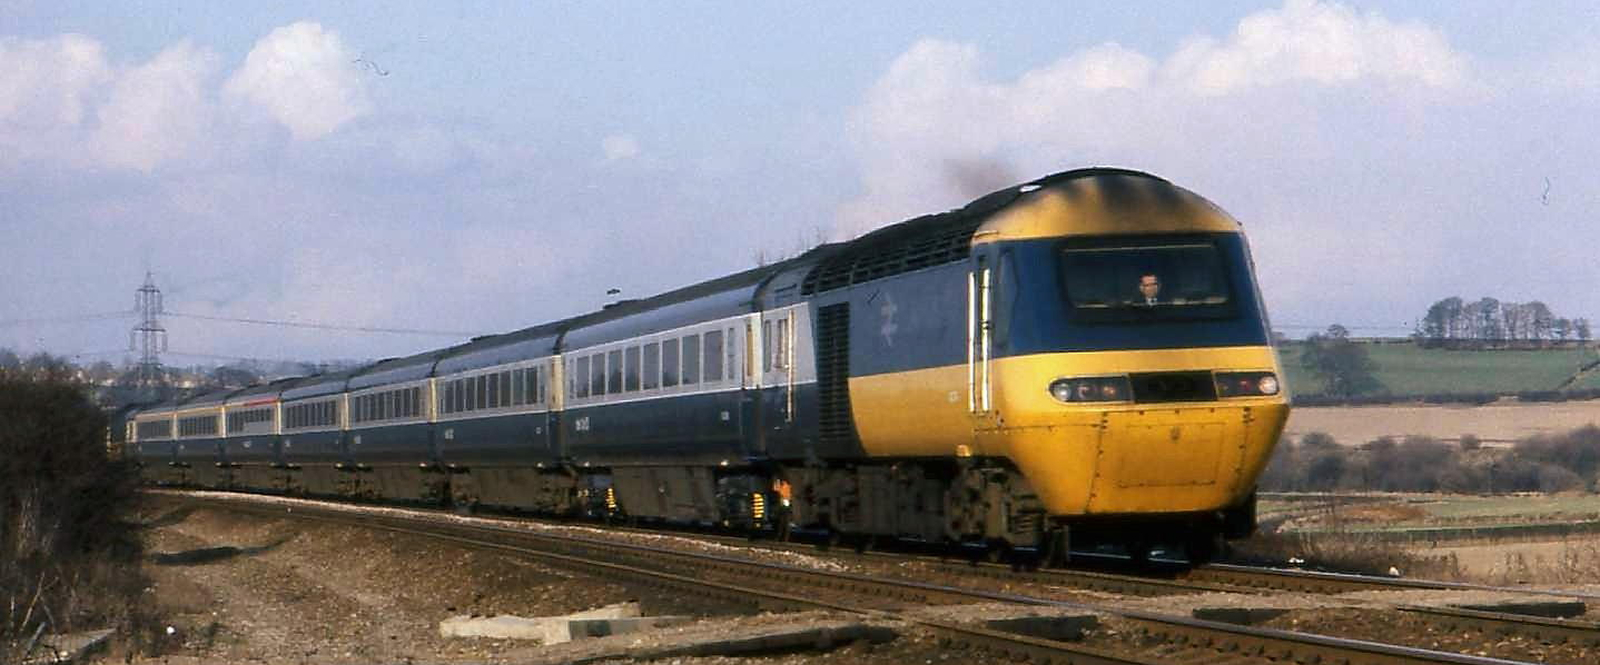 HST in Intercity blue and gray livery at Slittingmill